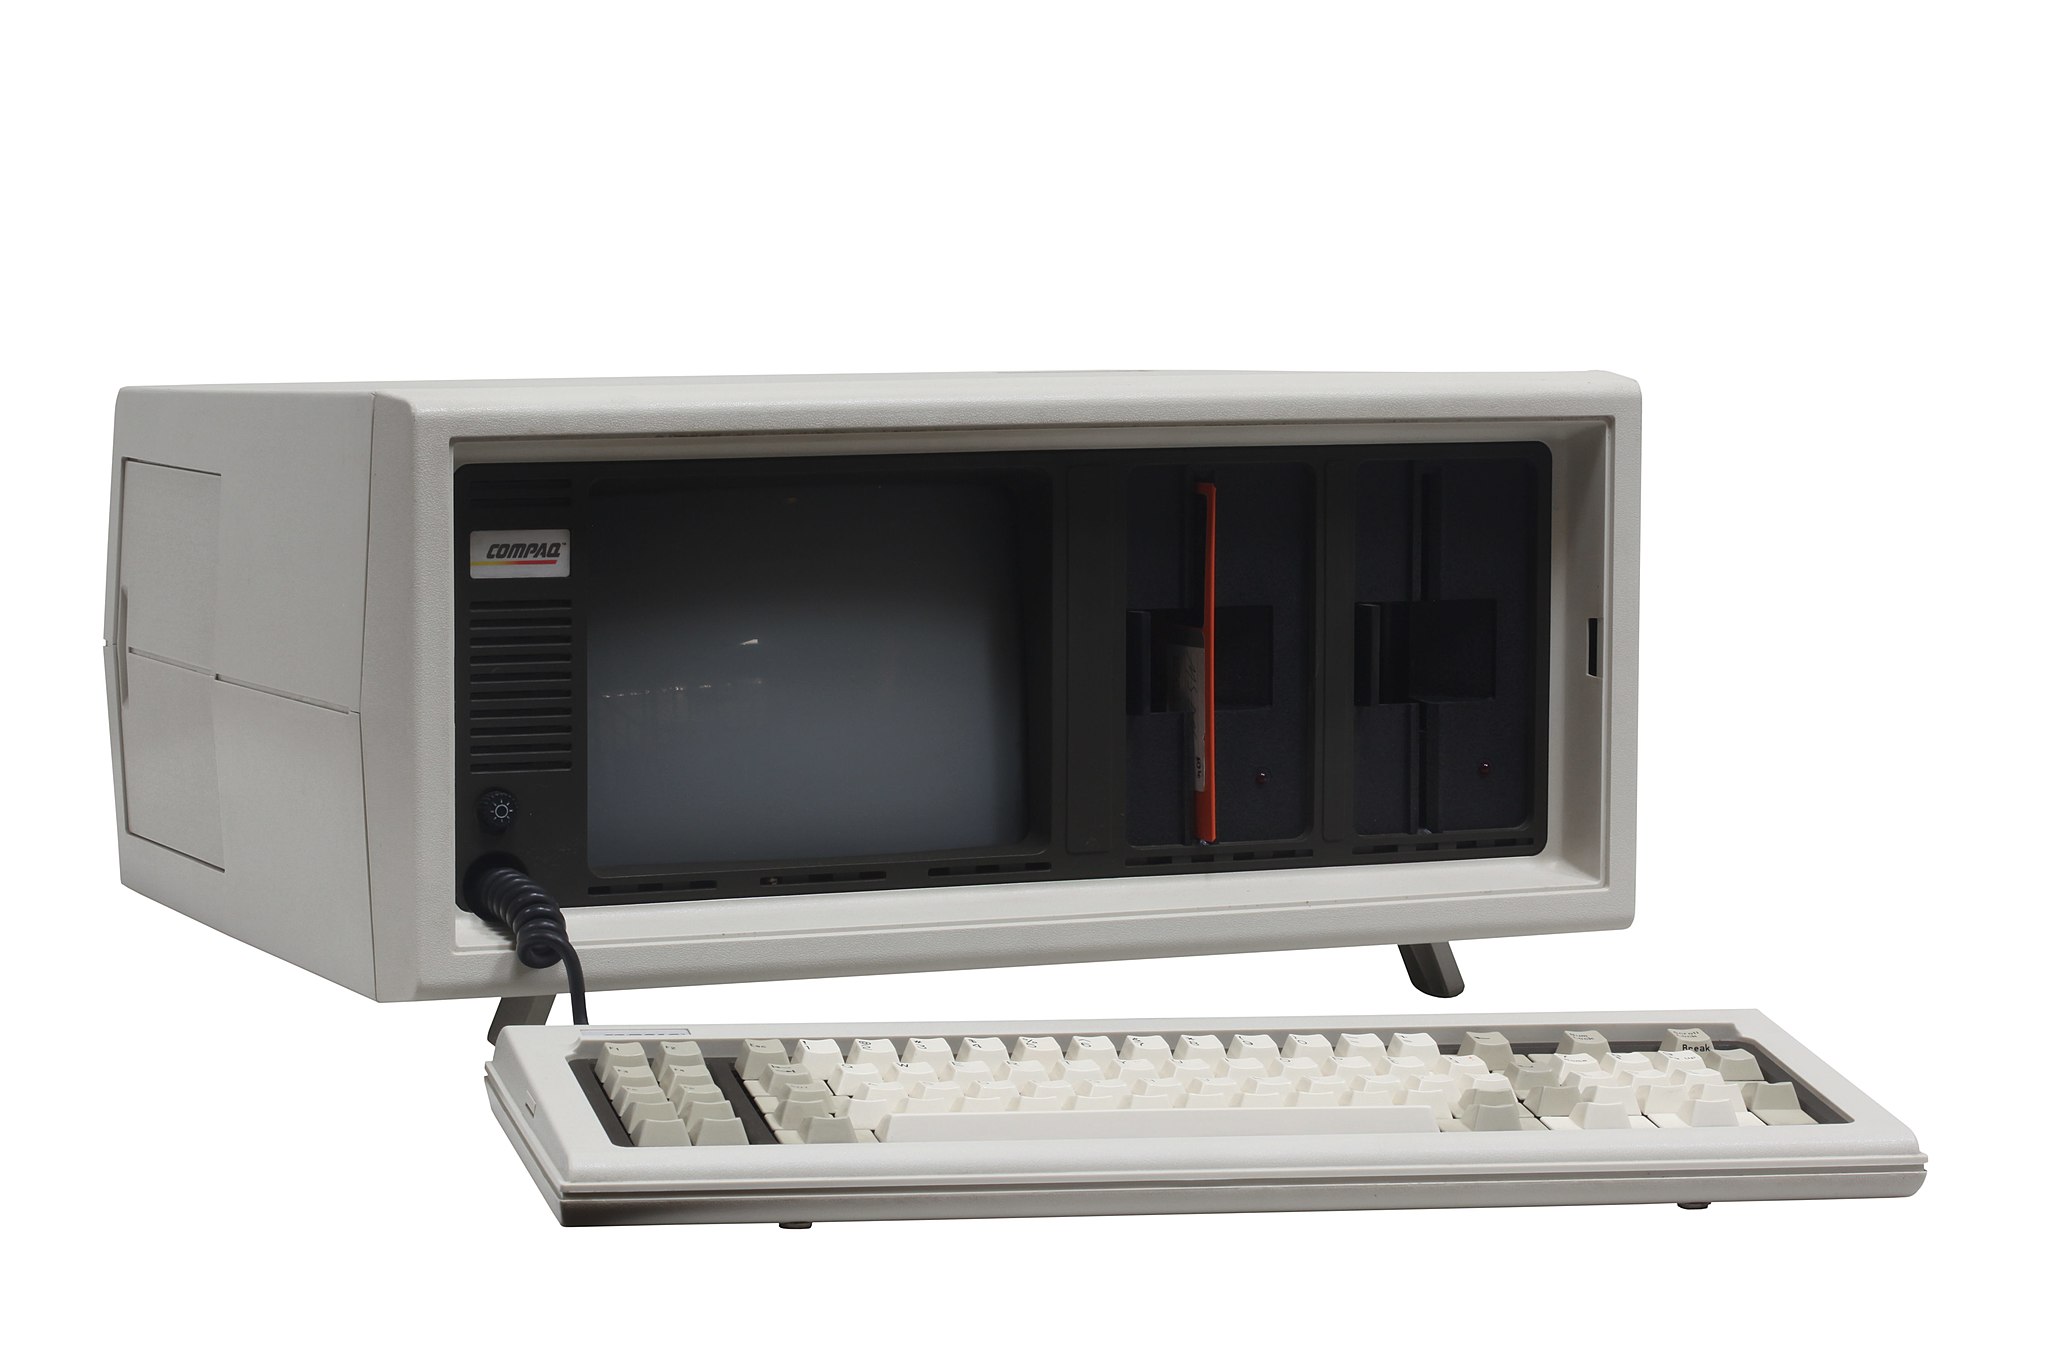 The Compaq Portable, an early IBM-compatible PC. These machines could run MS-DOS and the vast majority of IBM PC software, but you would occasionally run into software that accepts no substitutes.